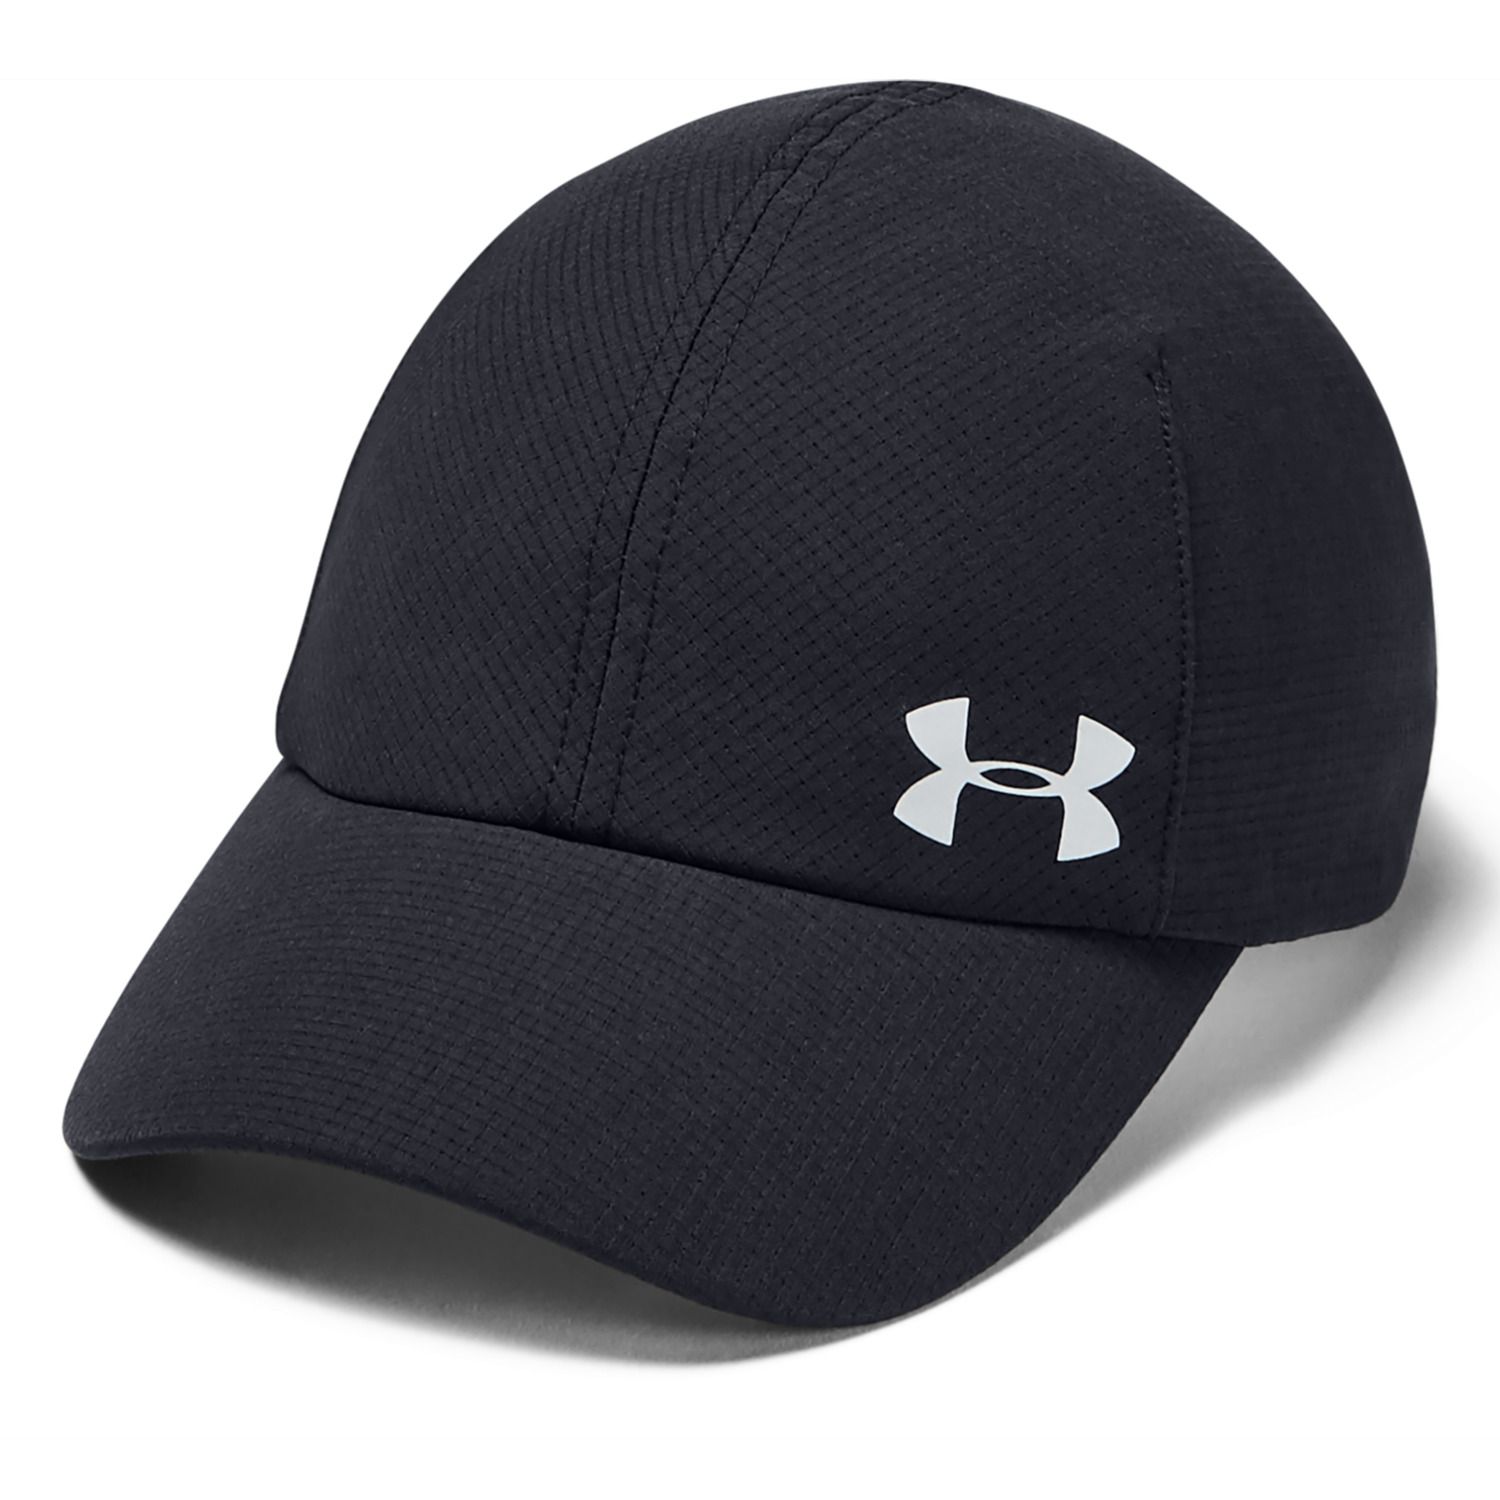 Womens Under Armour Hats - Accessories 